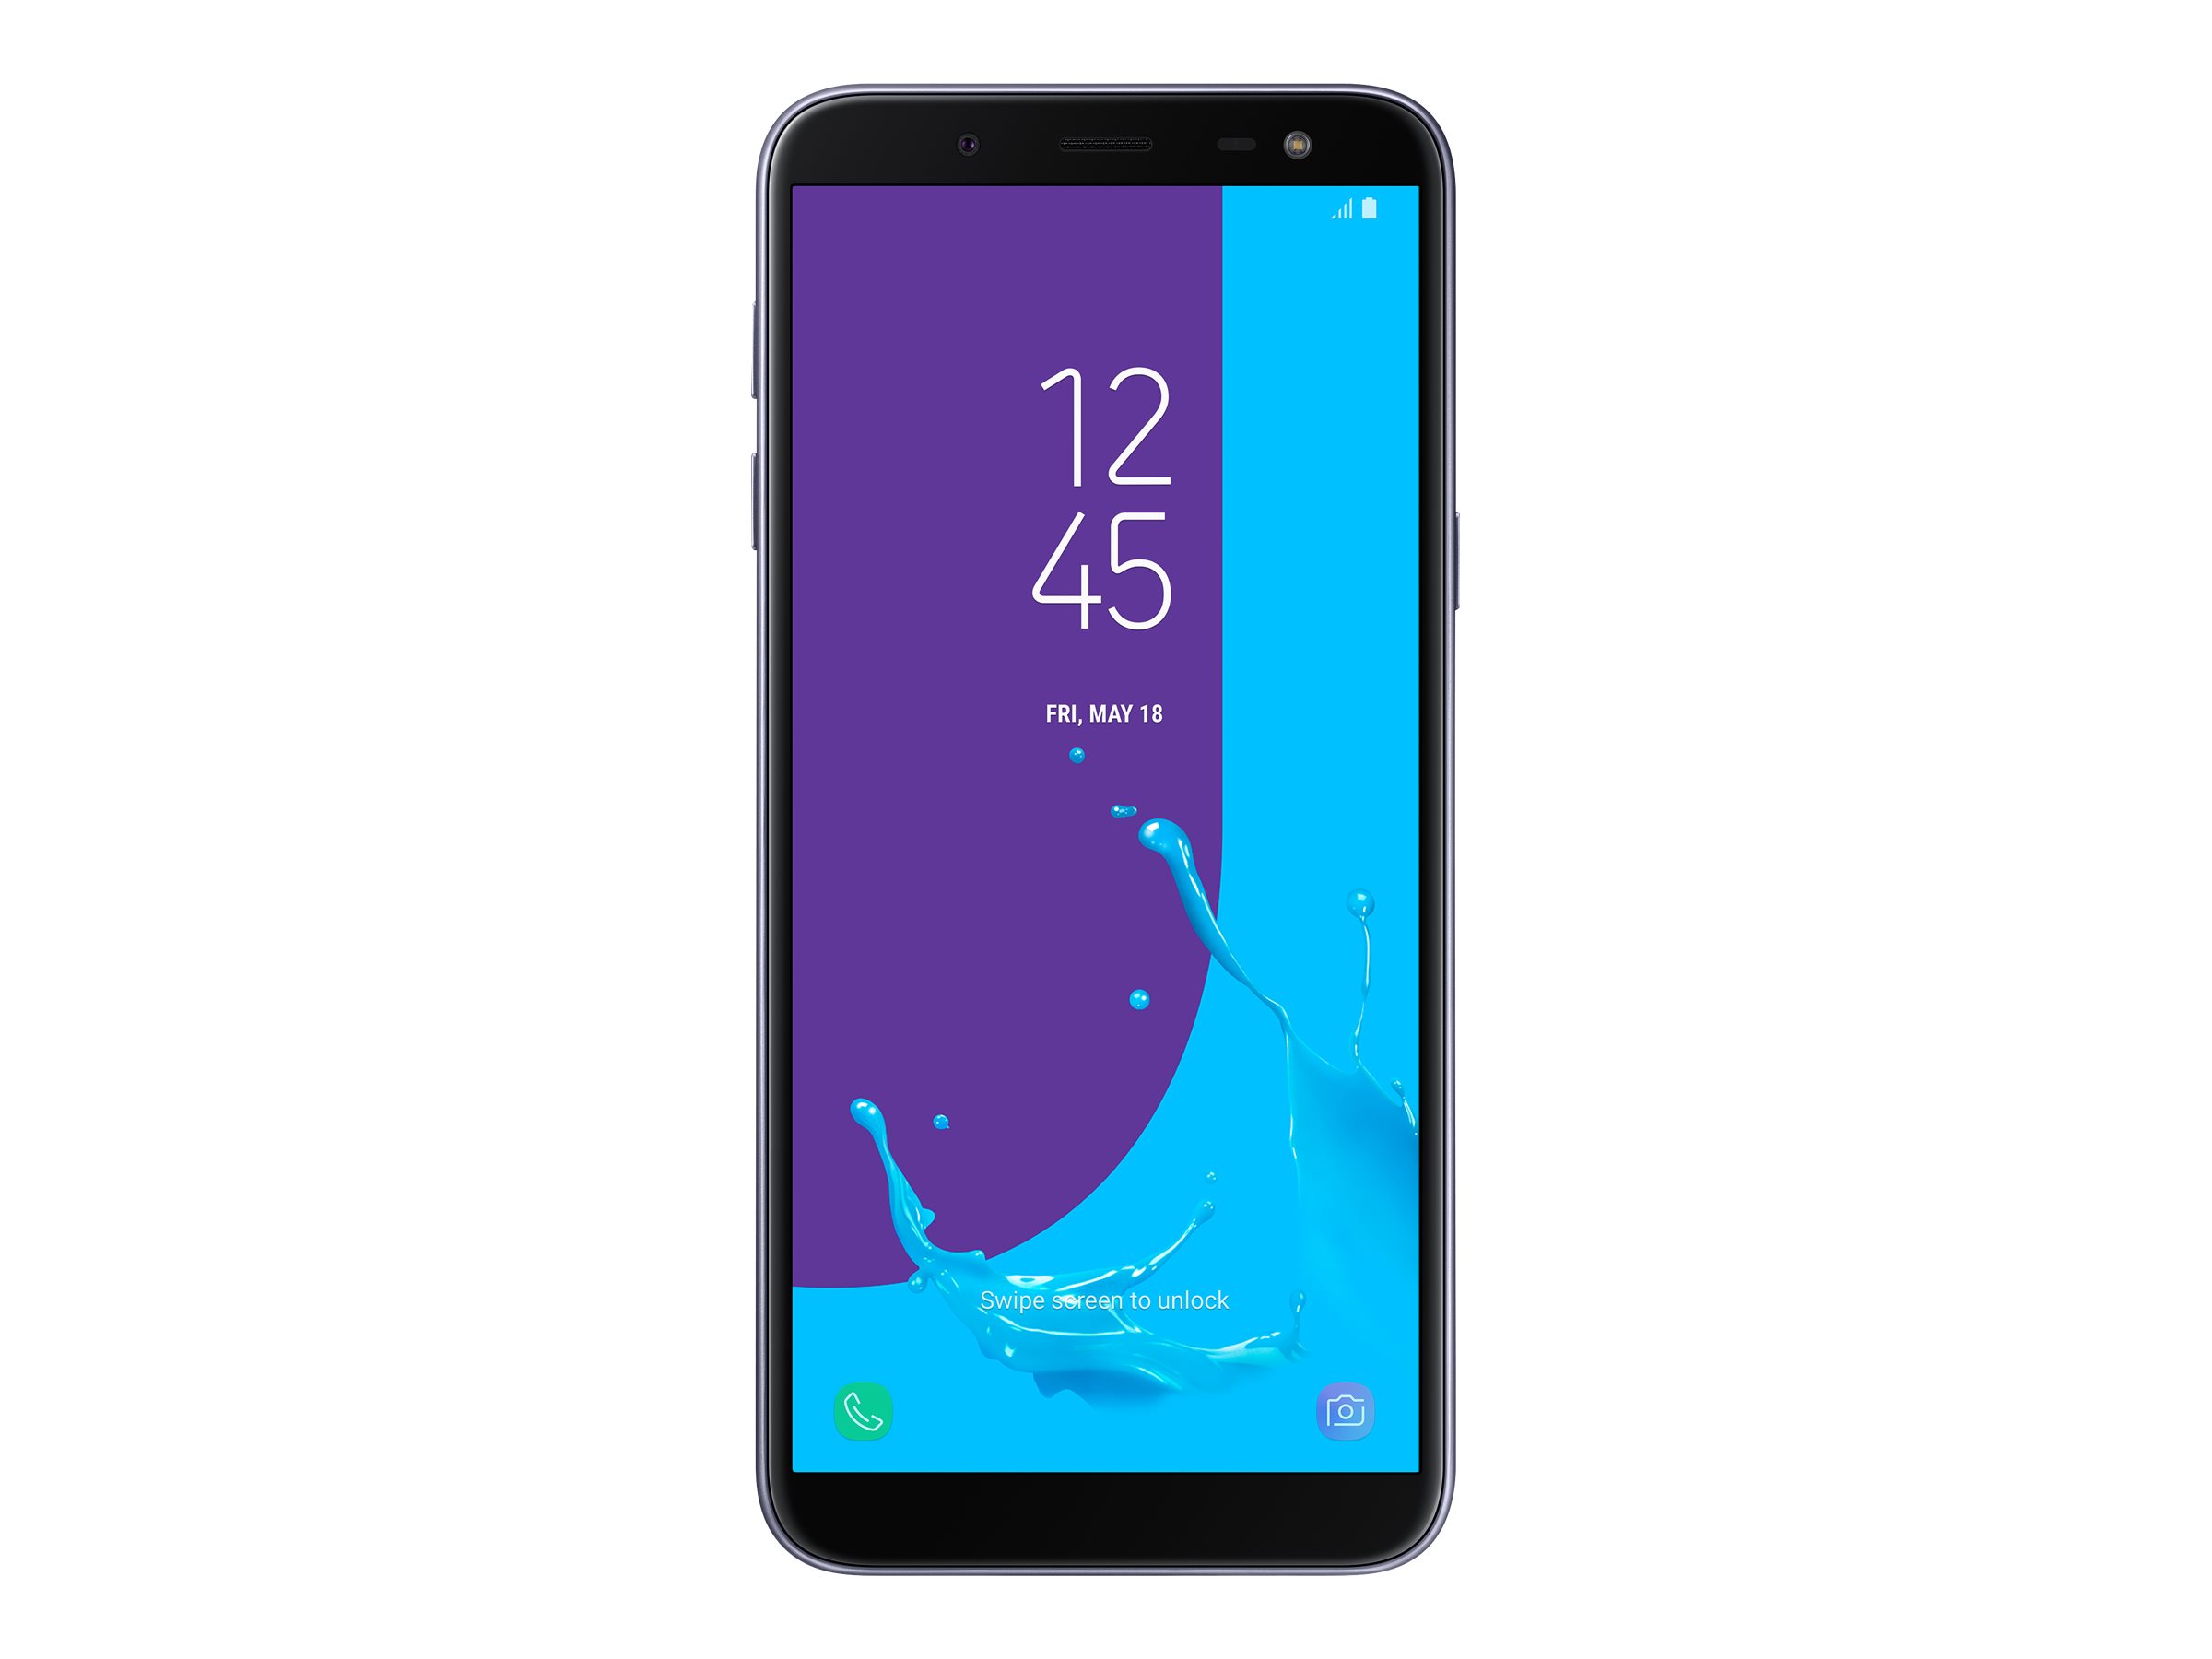 Samsung Galaxy A8 (2018) - Full phone specifications